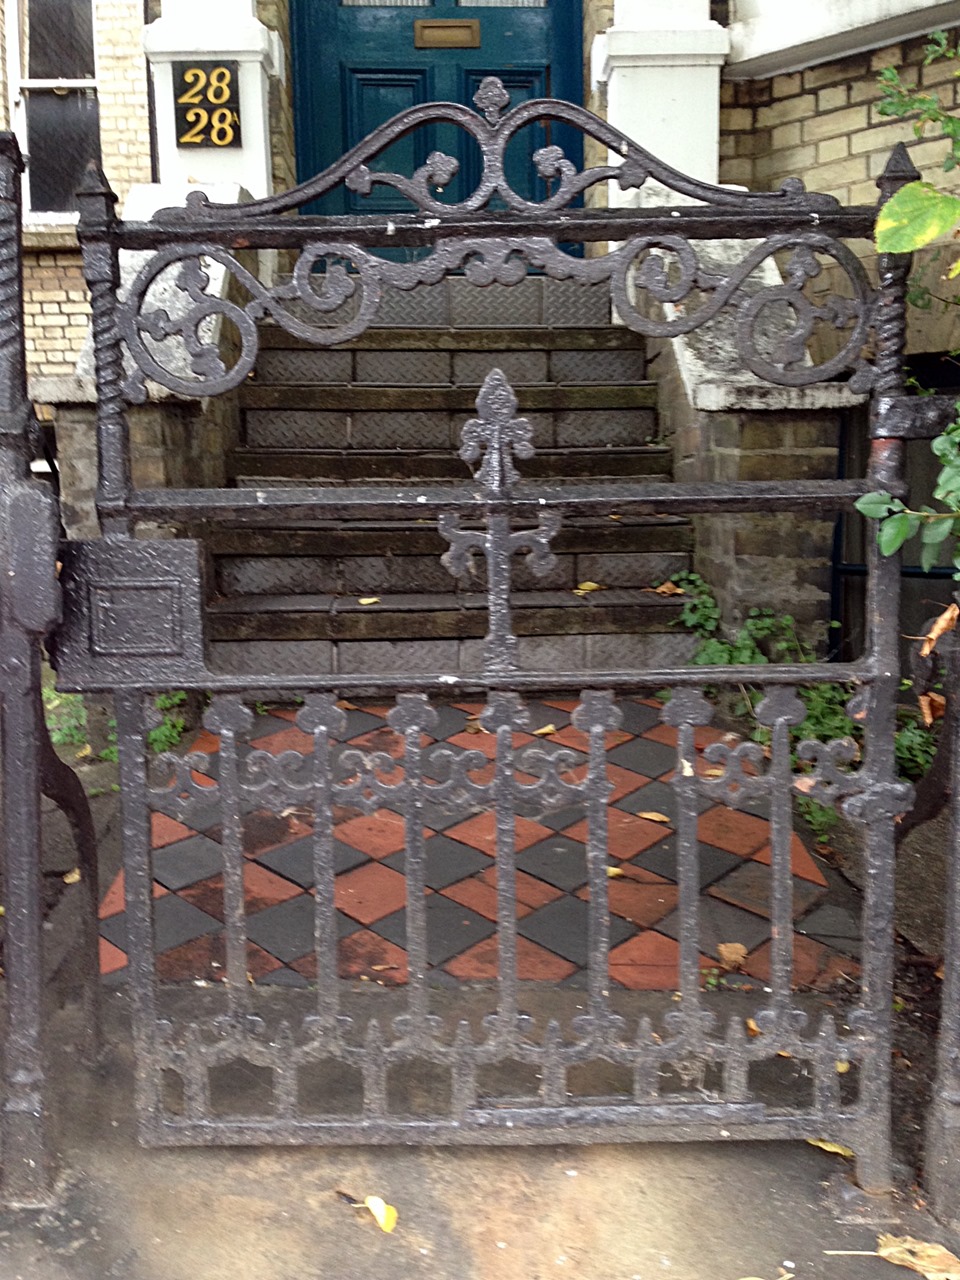 victorian original wrought iron roll back gate with old York stone quarry tile path and original London Stock brick wall Putney West Hill London# (7)